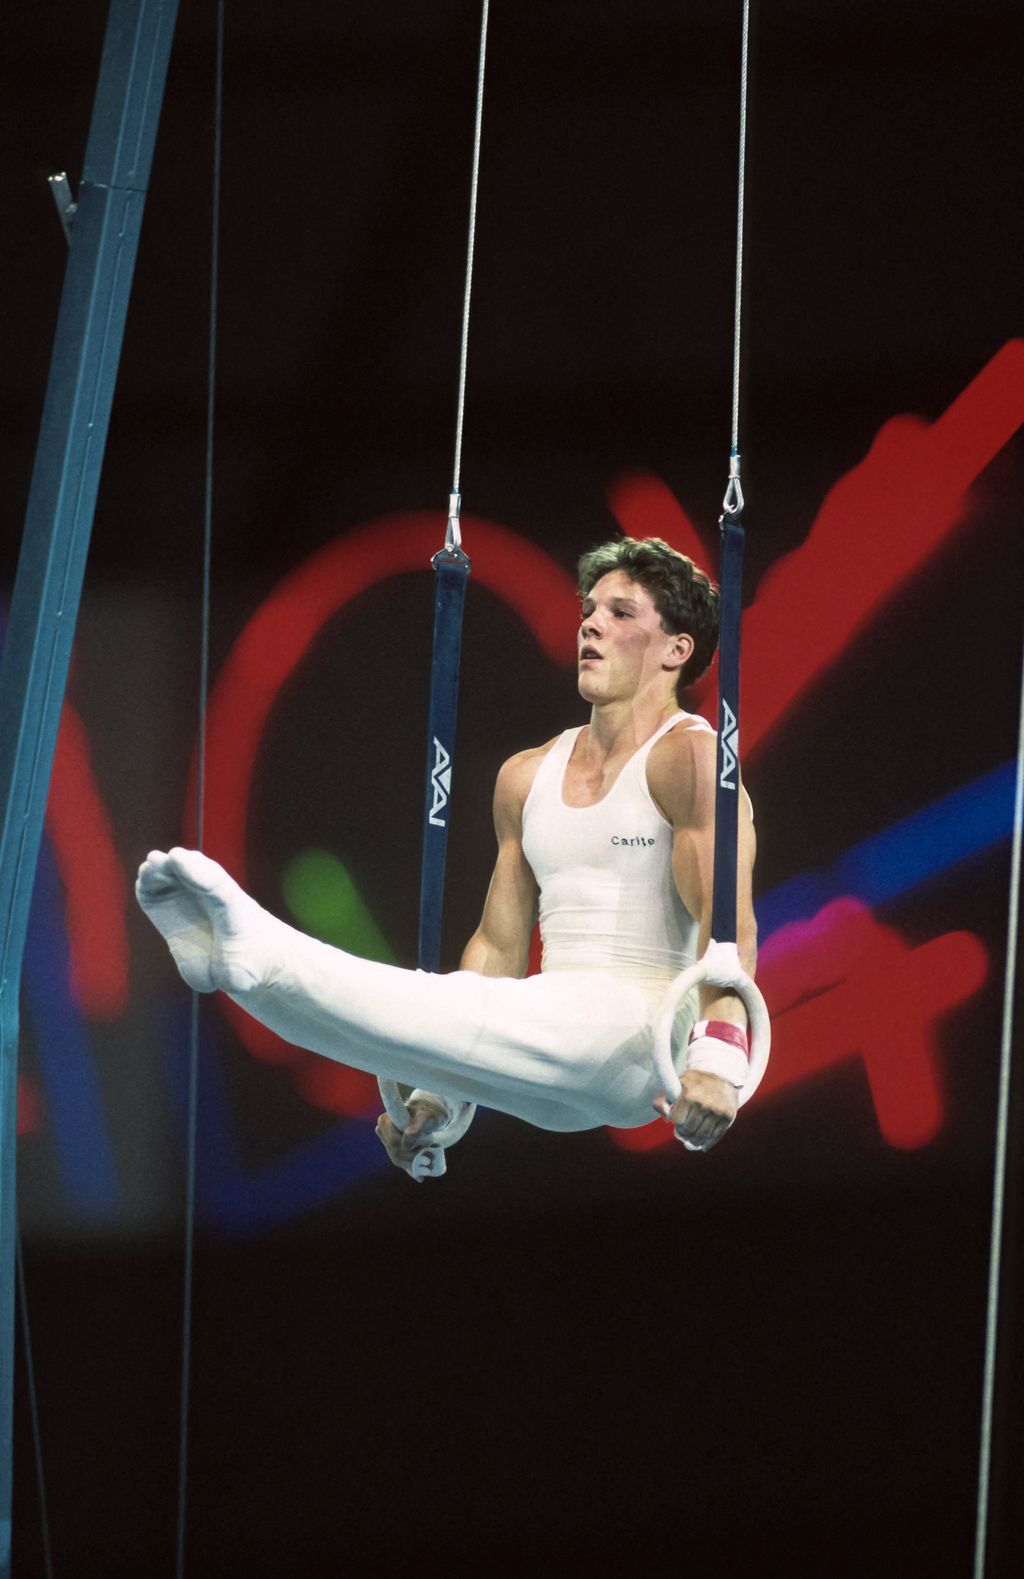 1990 Goodwill Games SEATTLE - JULY 1990:  Szilveszter Csollany of Hungary performs on the still rings during the gymnastics competition of the 1990 Goodwill Games held from July 20 - August 5, 1990.  The gymnastics venue was the Tacoma Dome in Tacoma, Was